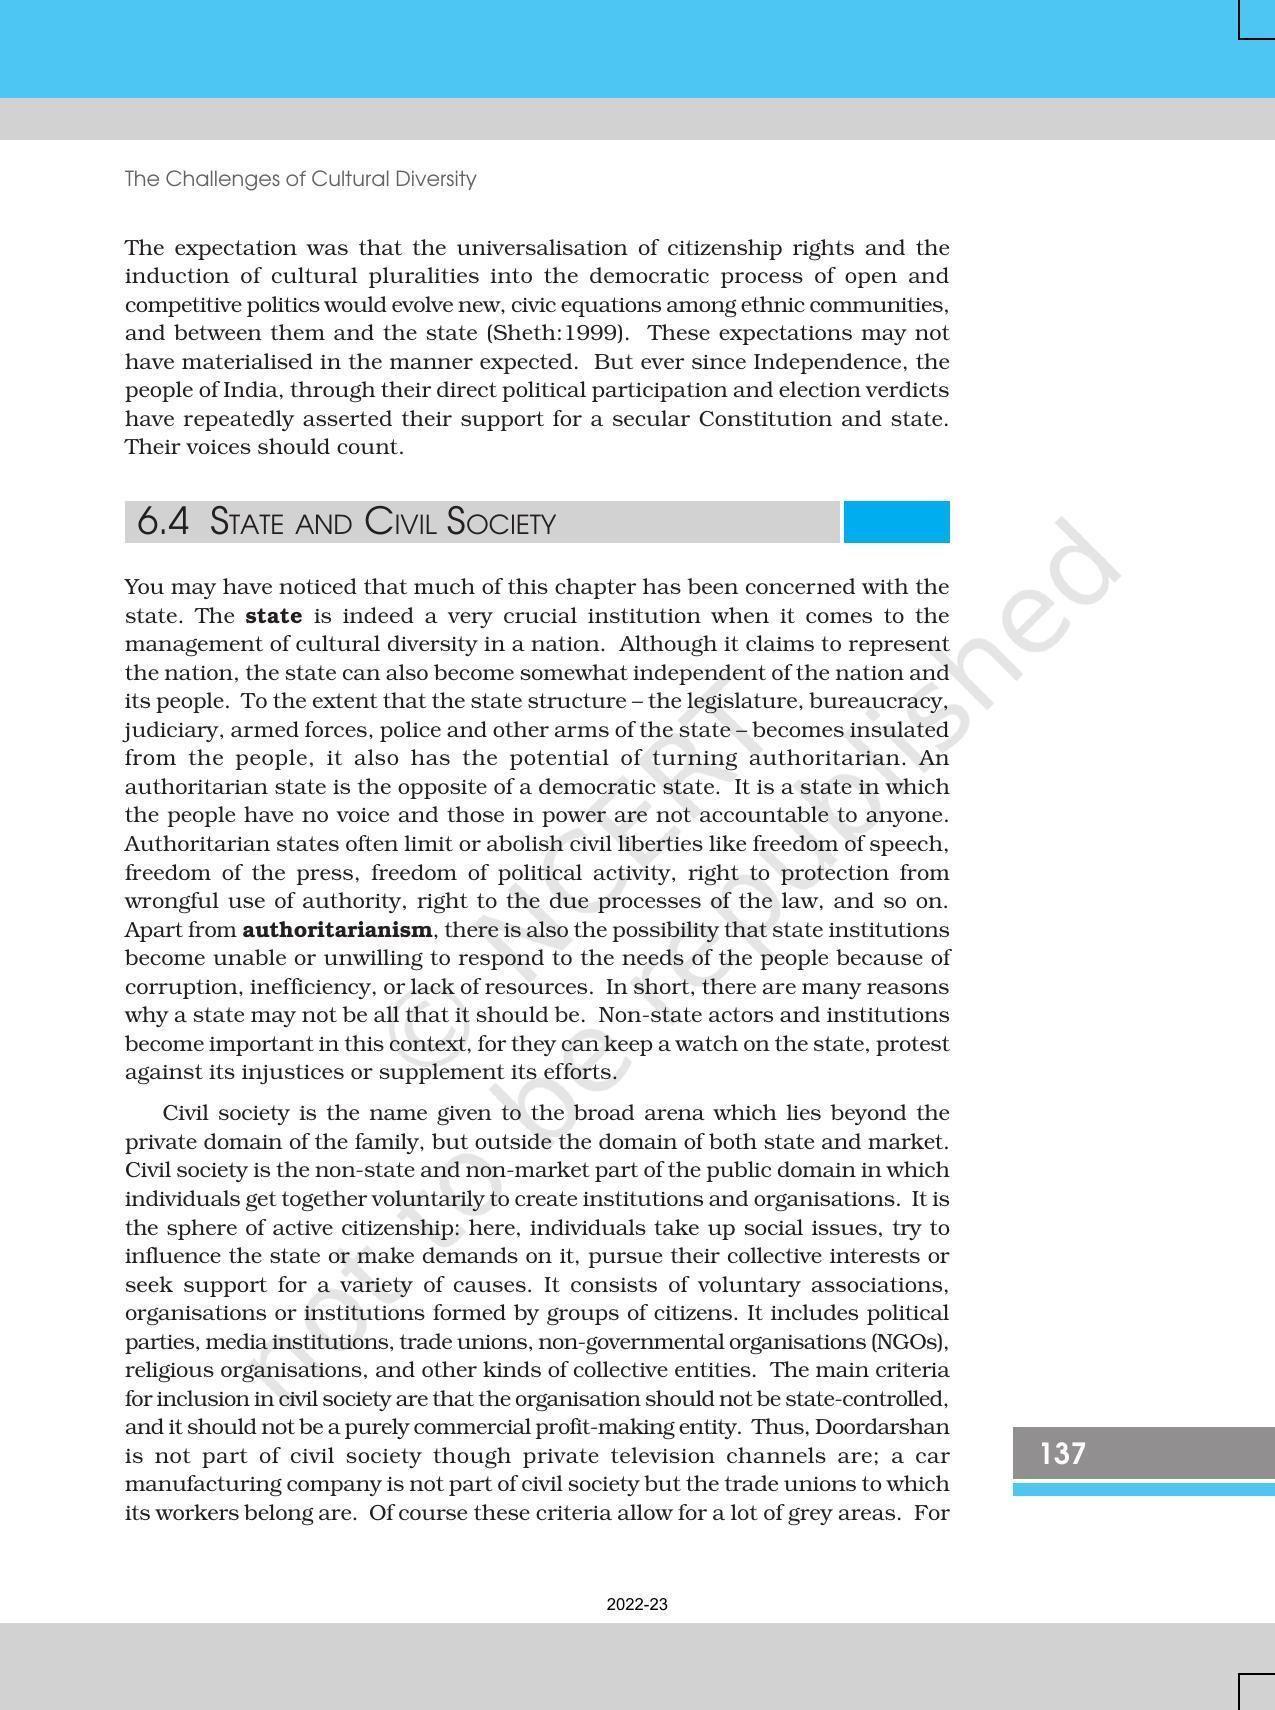 NCERT Book for Class 12 Sociology (Indian Society) Chapter 6 The Challenges of Cultural Diversity - Page 25